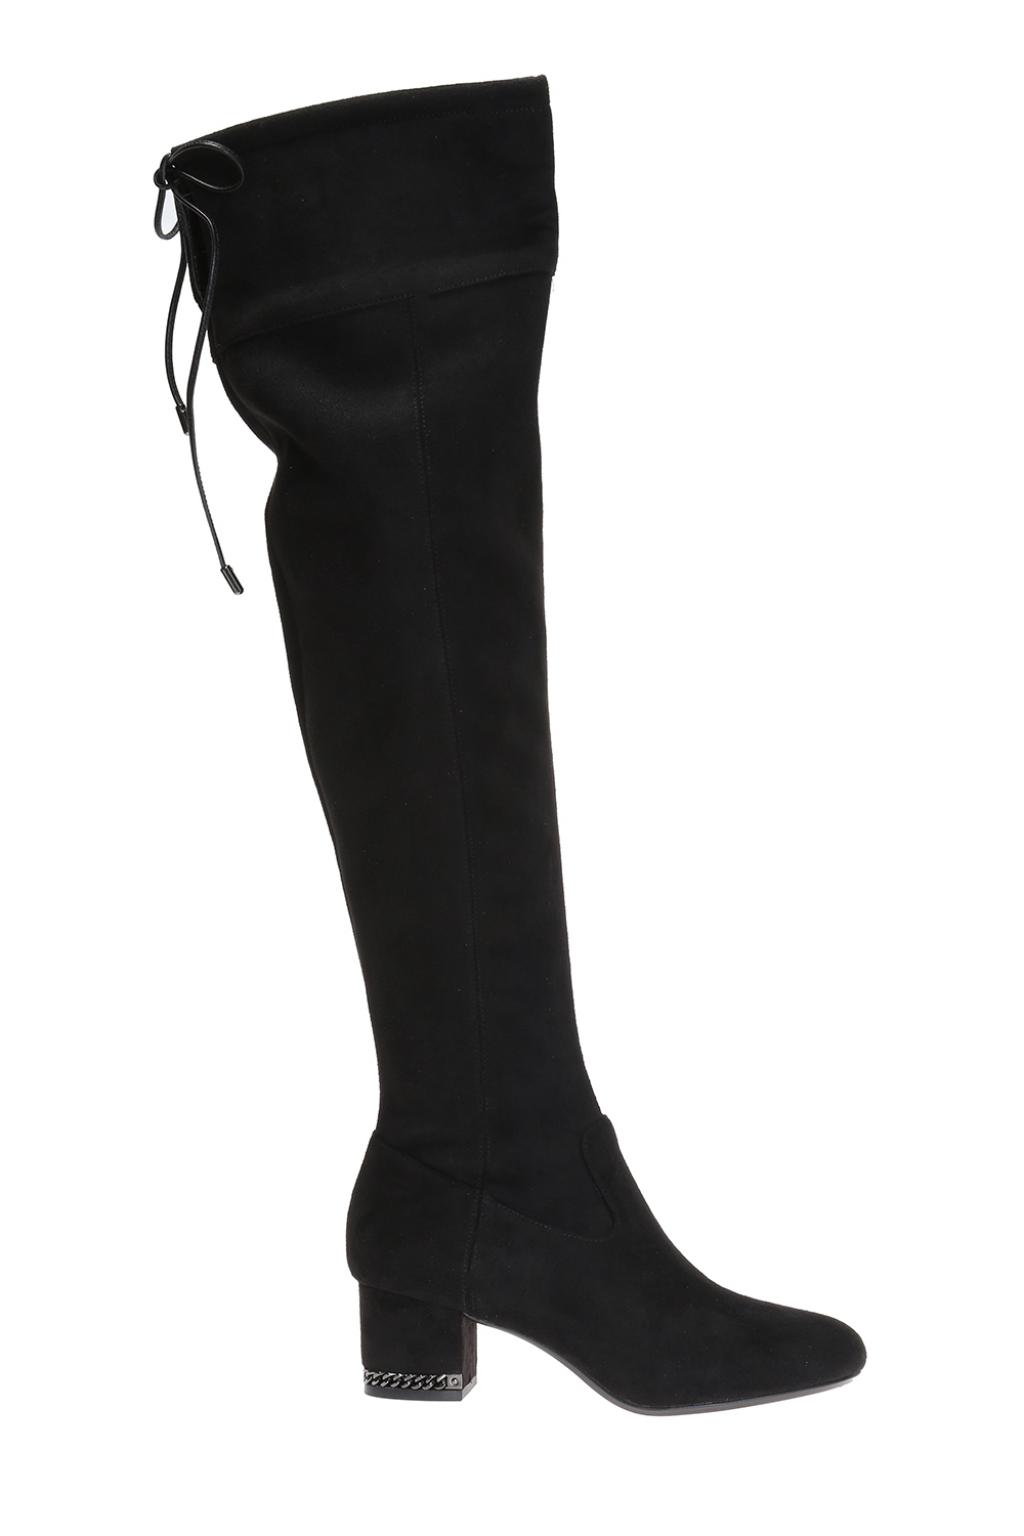 over the knee michael kors boots